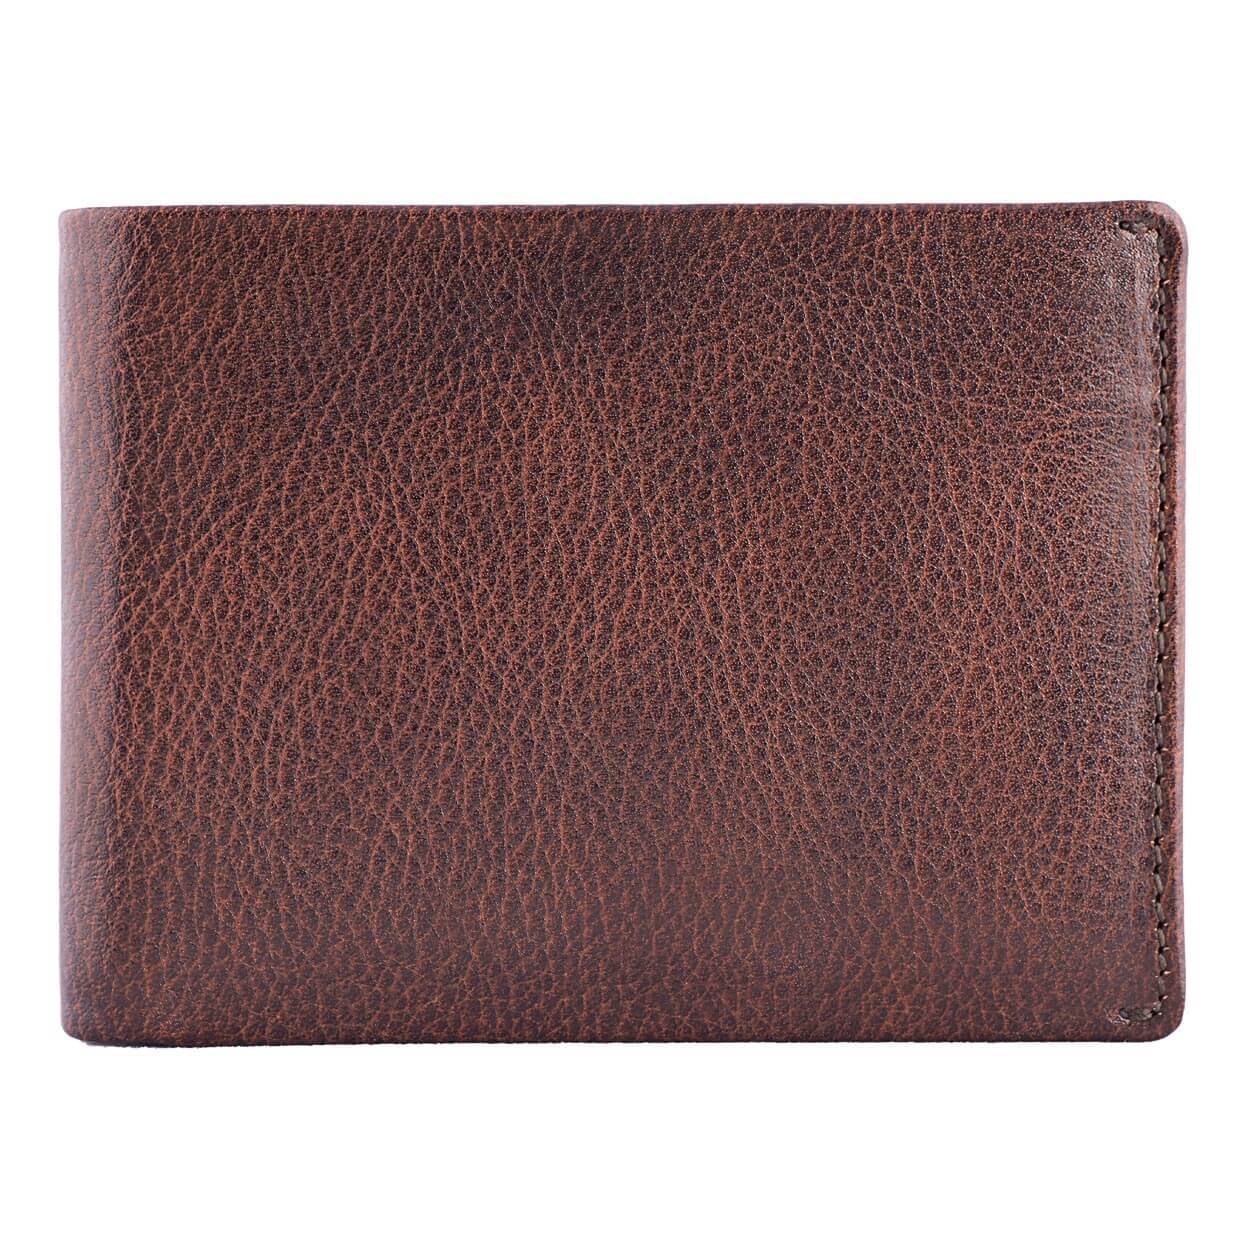 A slim, stylish, and secure wallet in Gemini Brown made with genuine Saffiano leather and RFID blocking technology - Front View